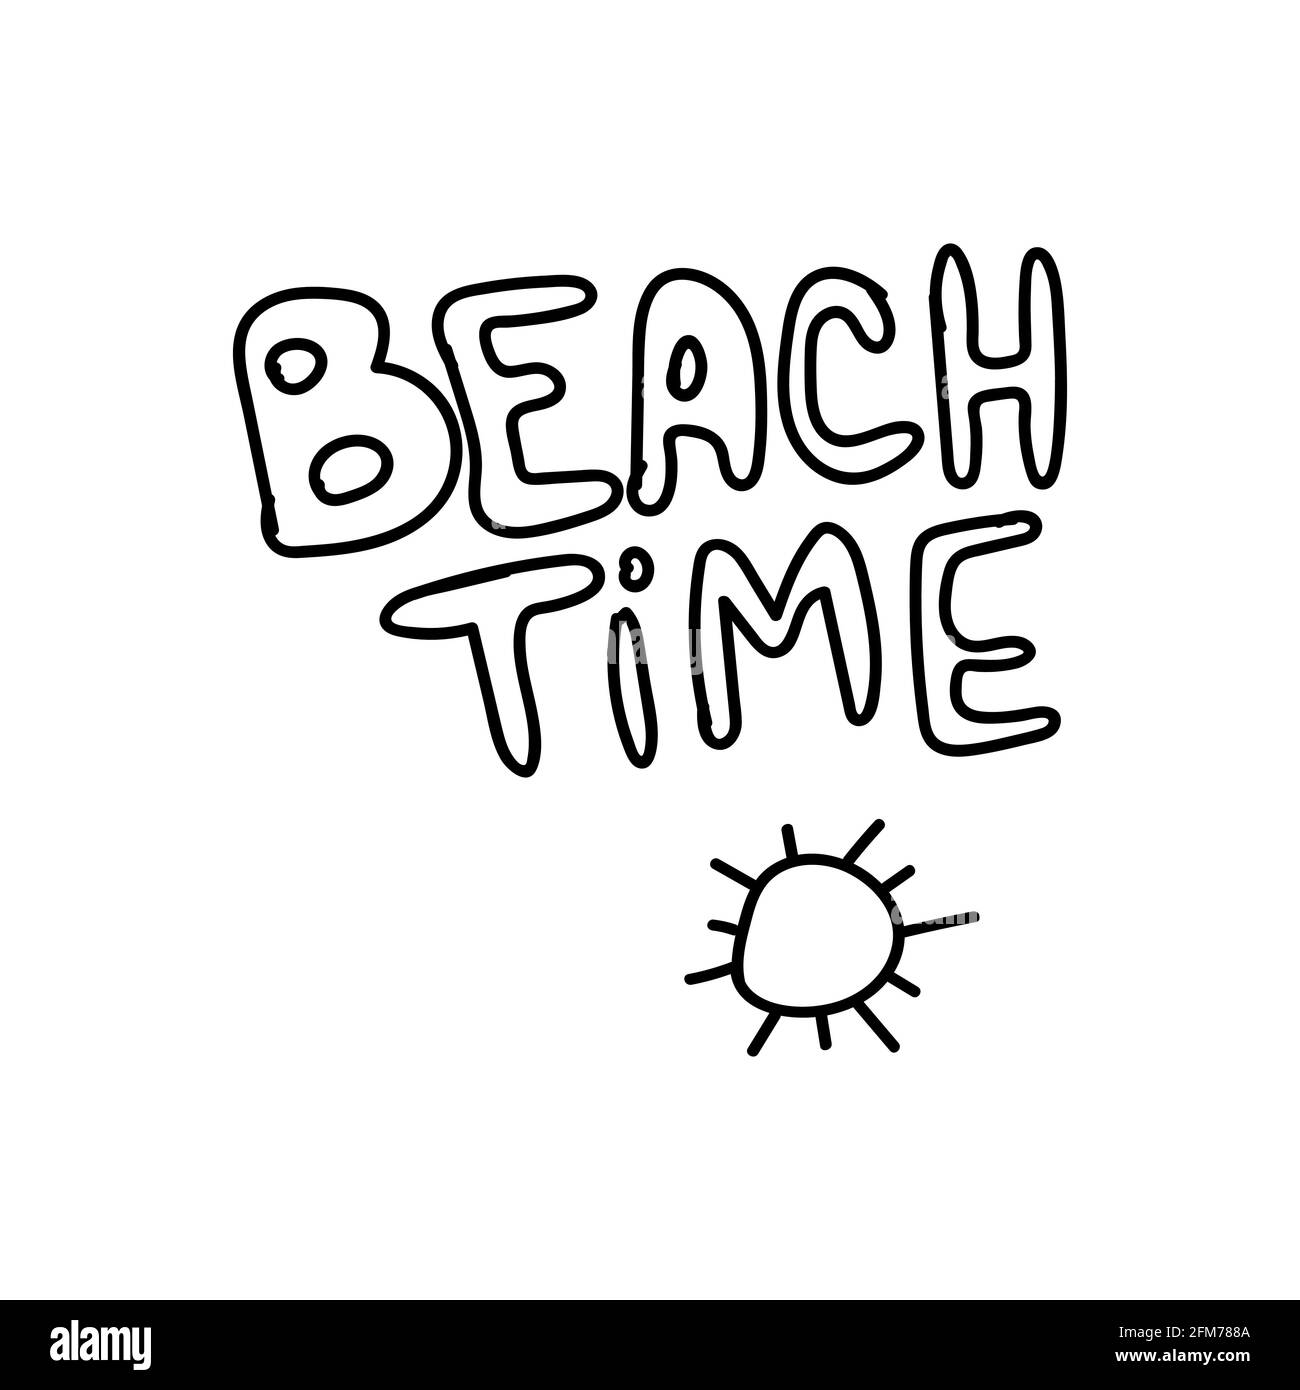 Beach time vector lettering with sun shape Stock Vector